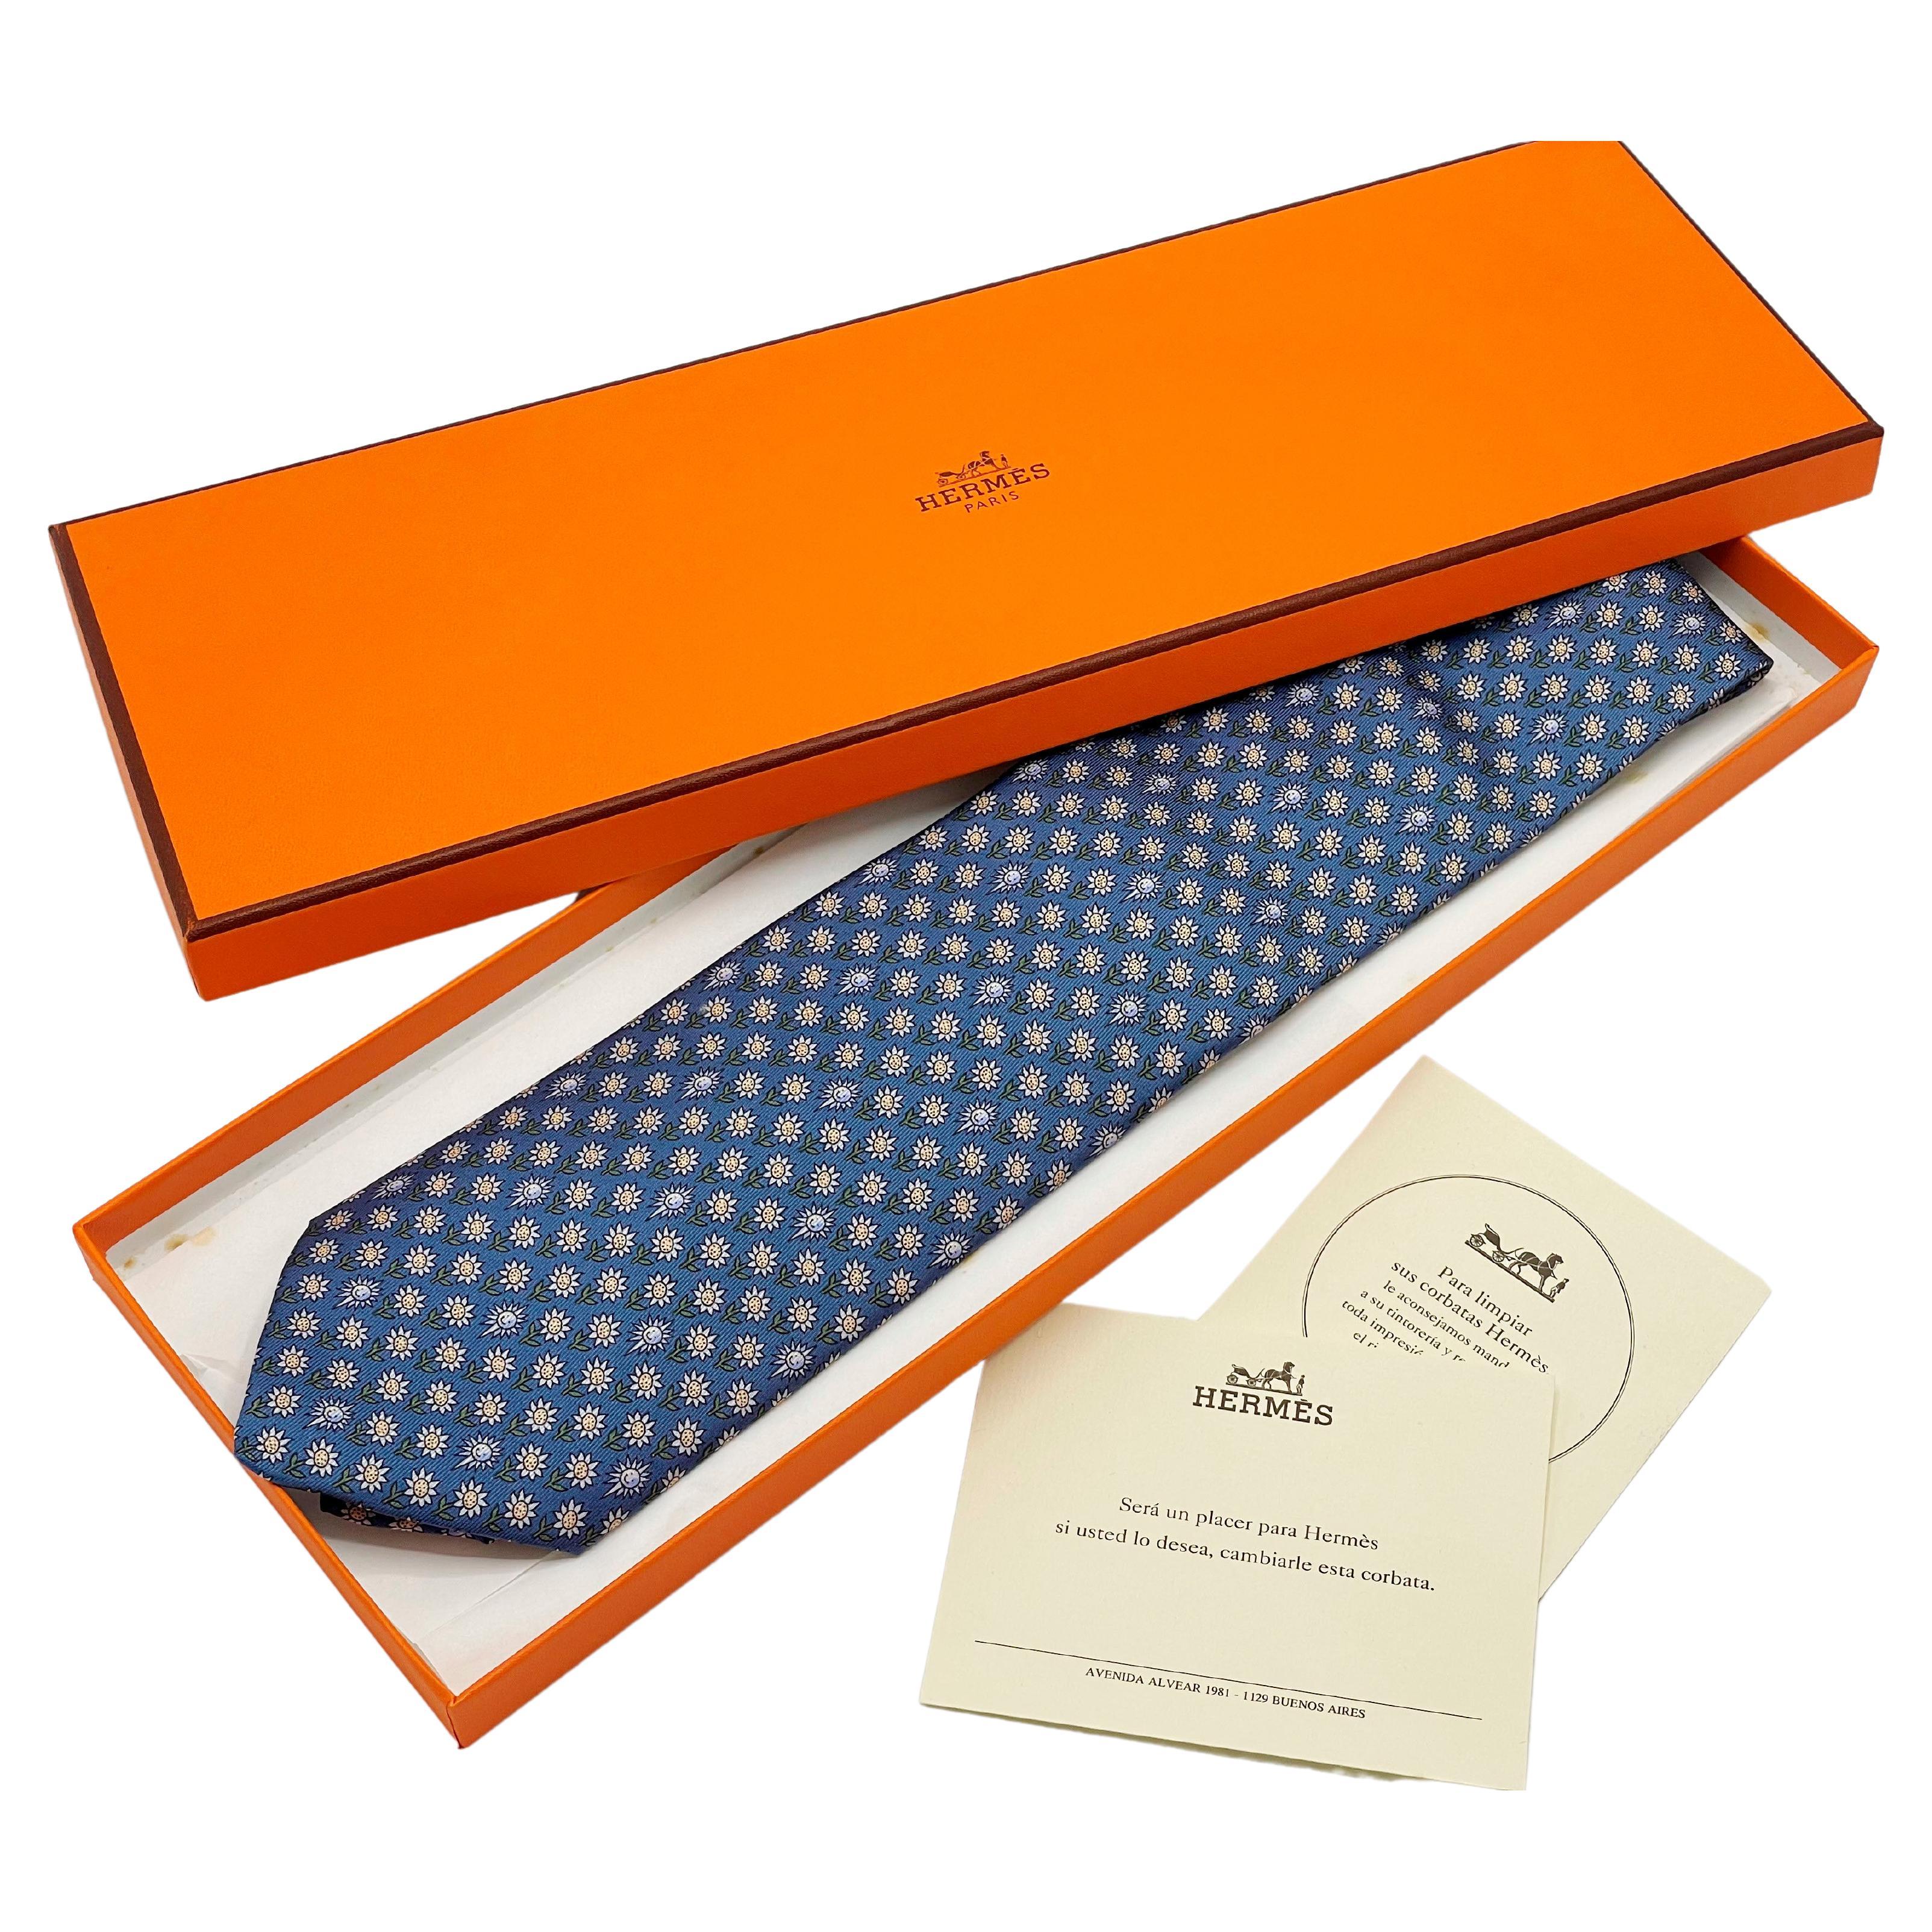 Hermes Daisy Print Silk Tie With Original Box And Ribbon For Sale